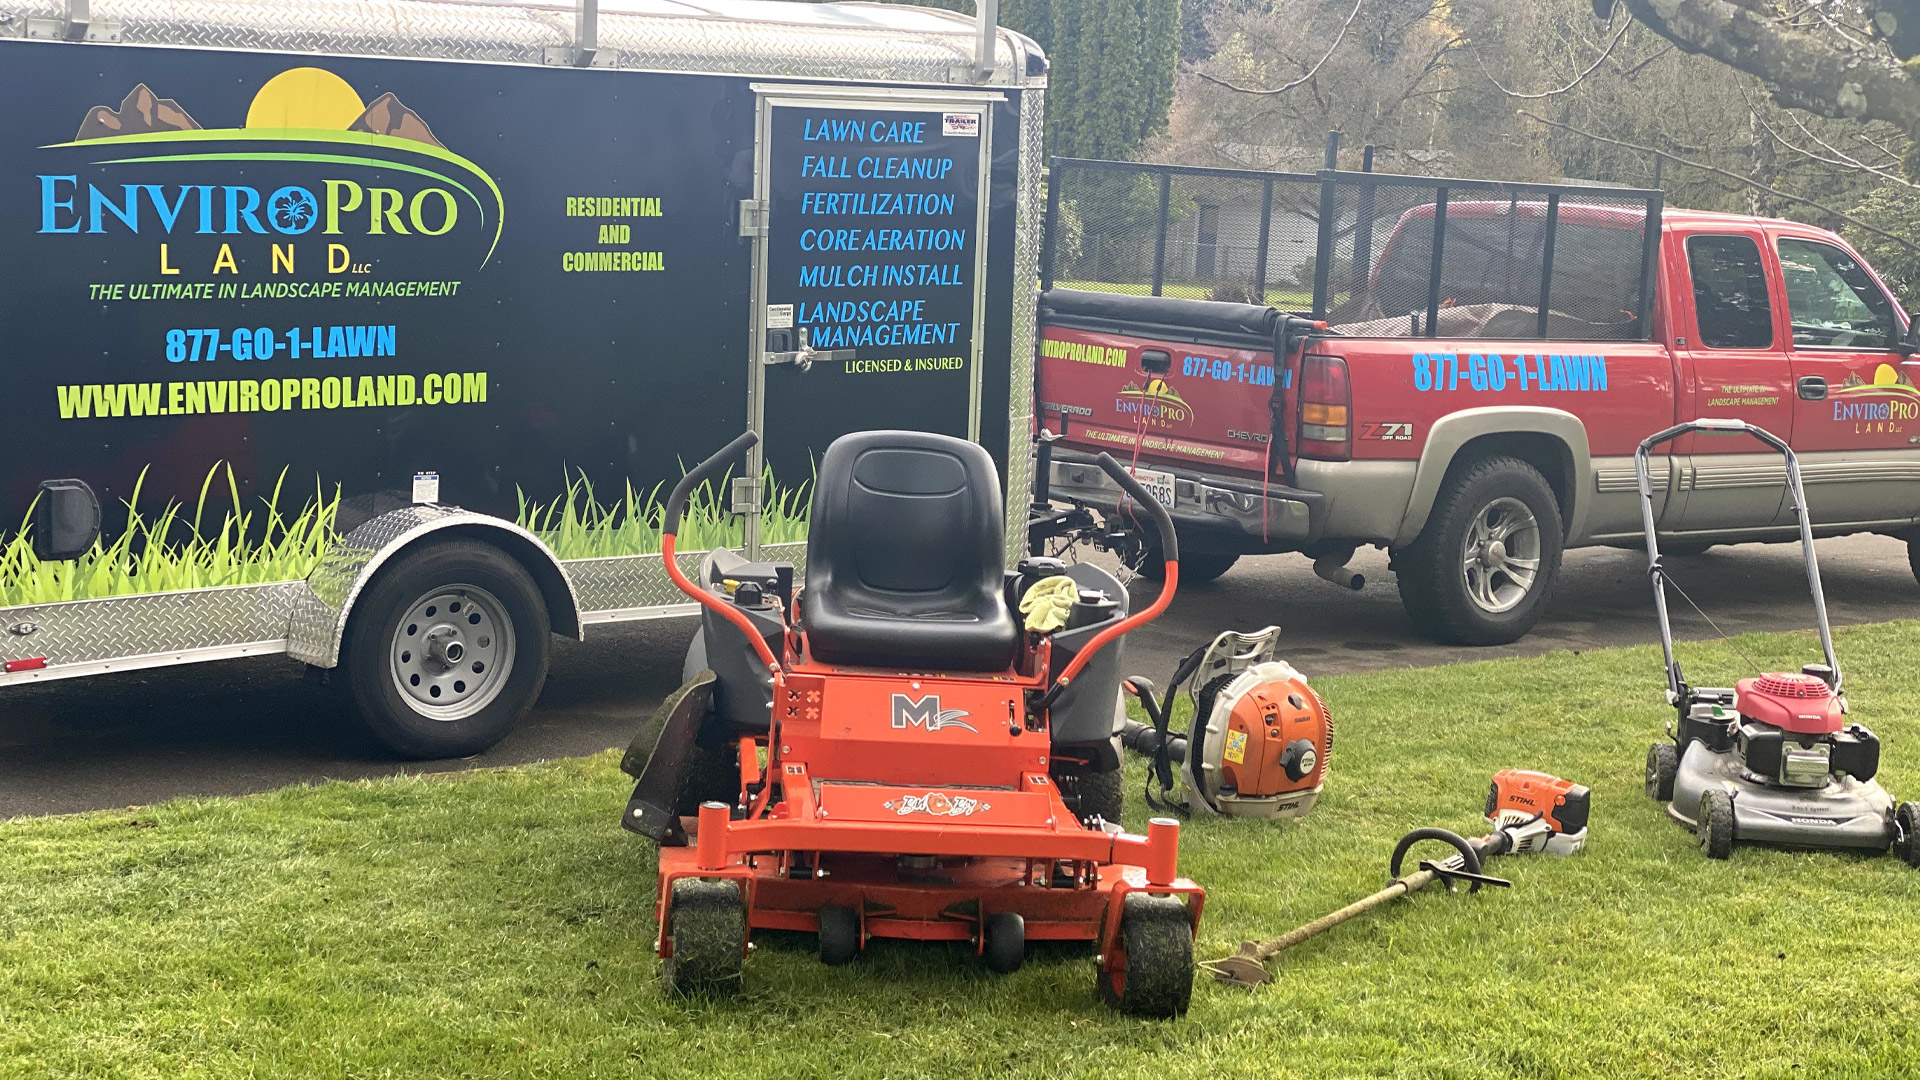 Our company truck, trailer, and lawn equipment.